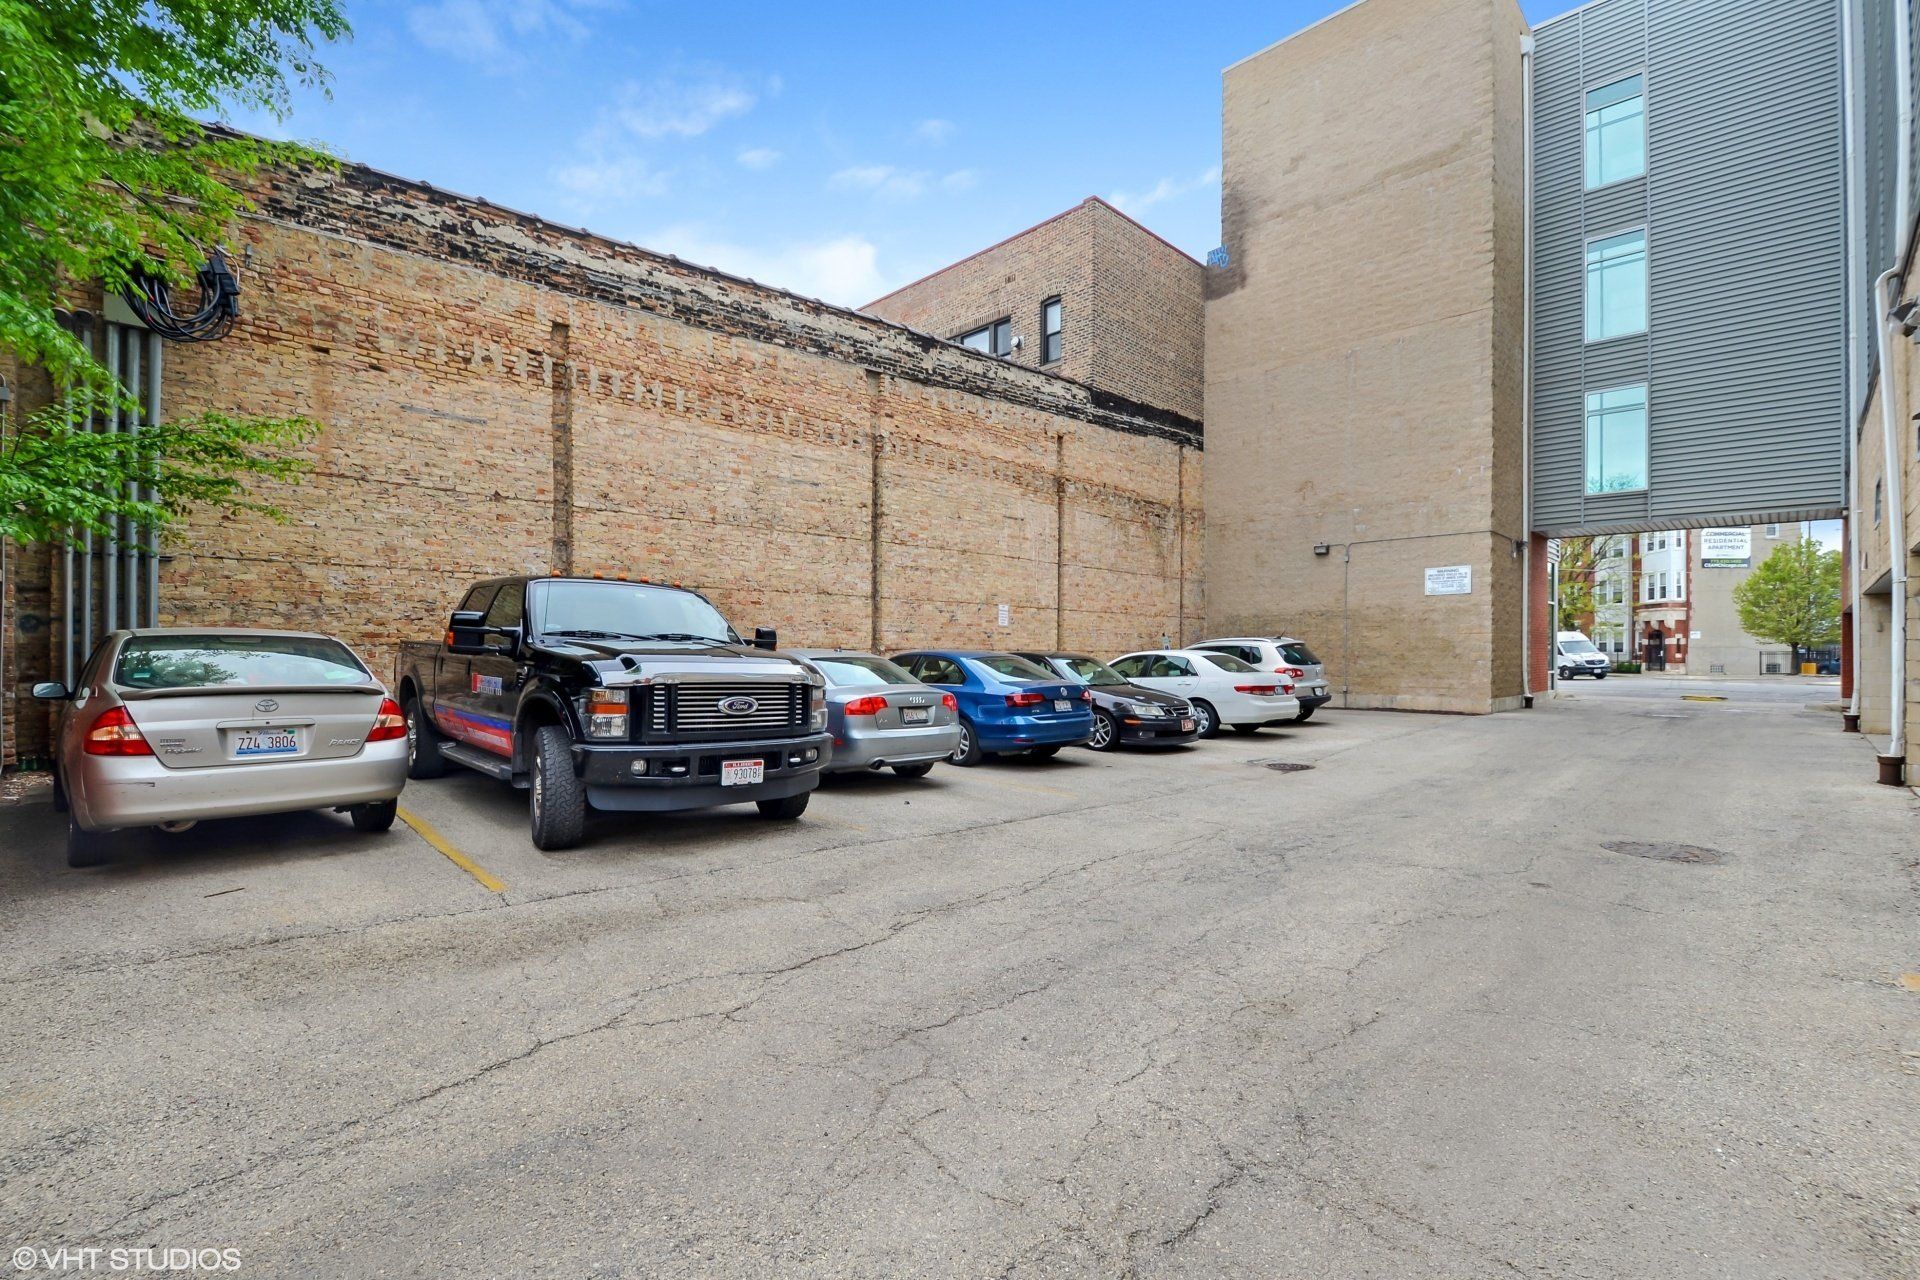 A row of cars are parked in a parking lot next to a building  at 2000 N Milwaukee Apartments.